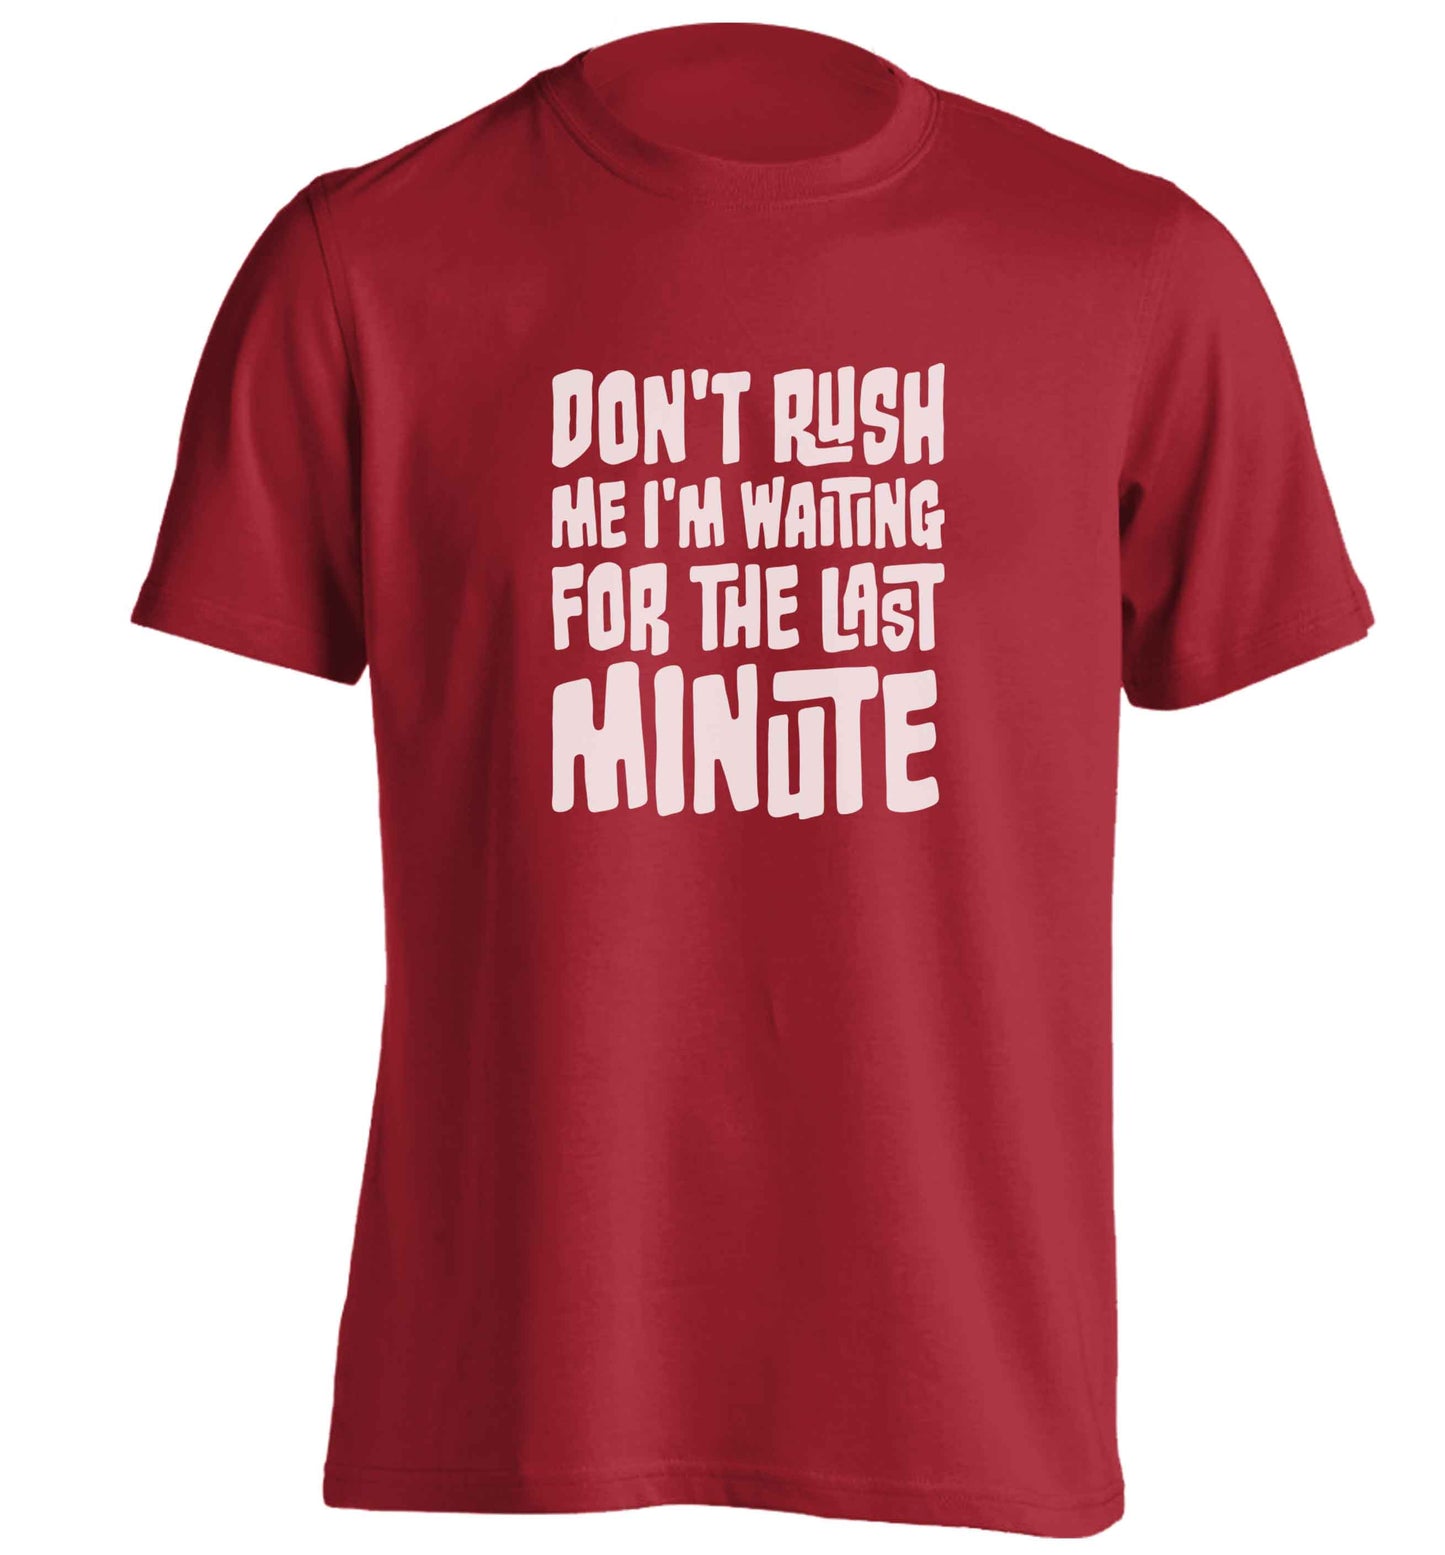 Don't rush me I'm waiting for the last minute adults unisex red Tshirt 2XL